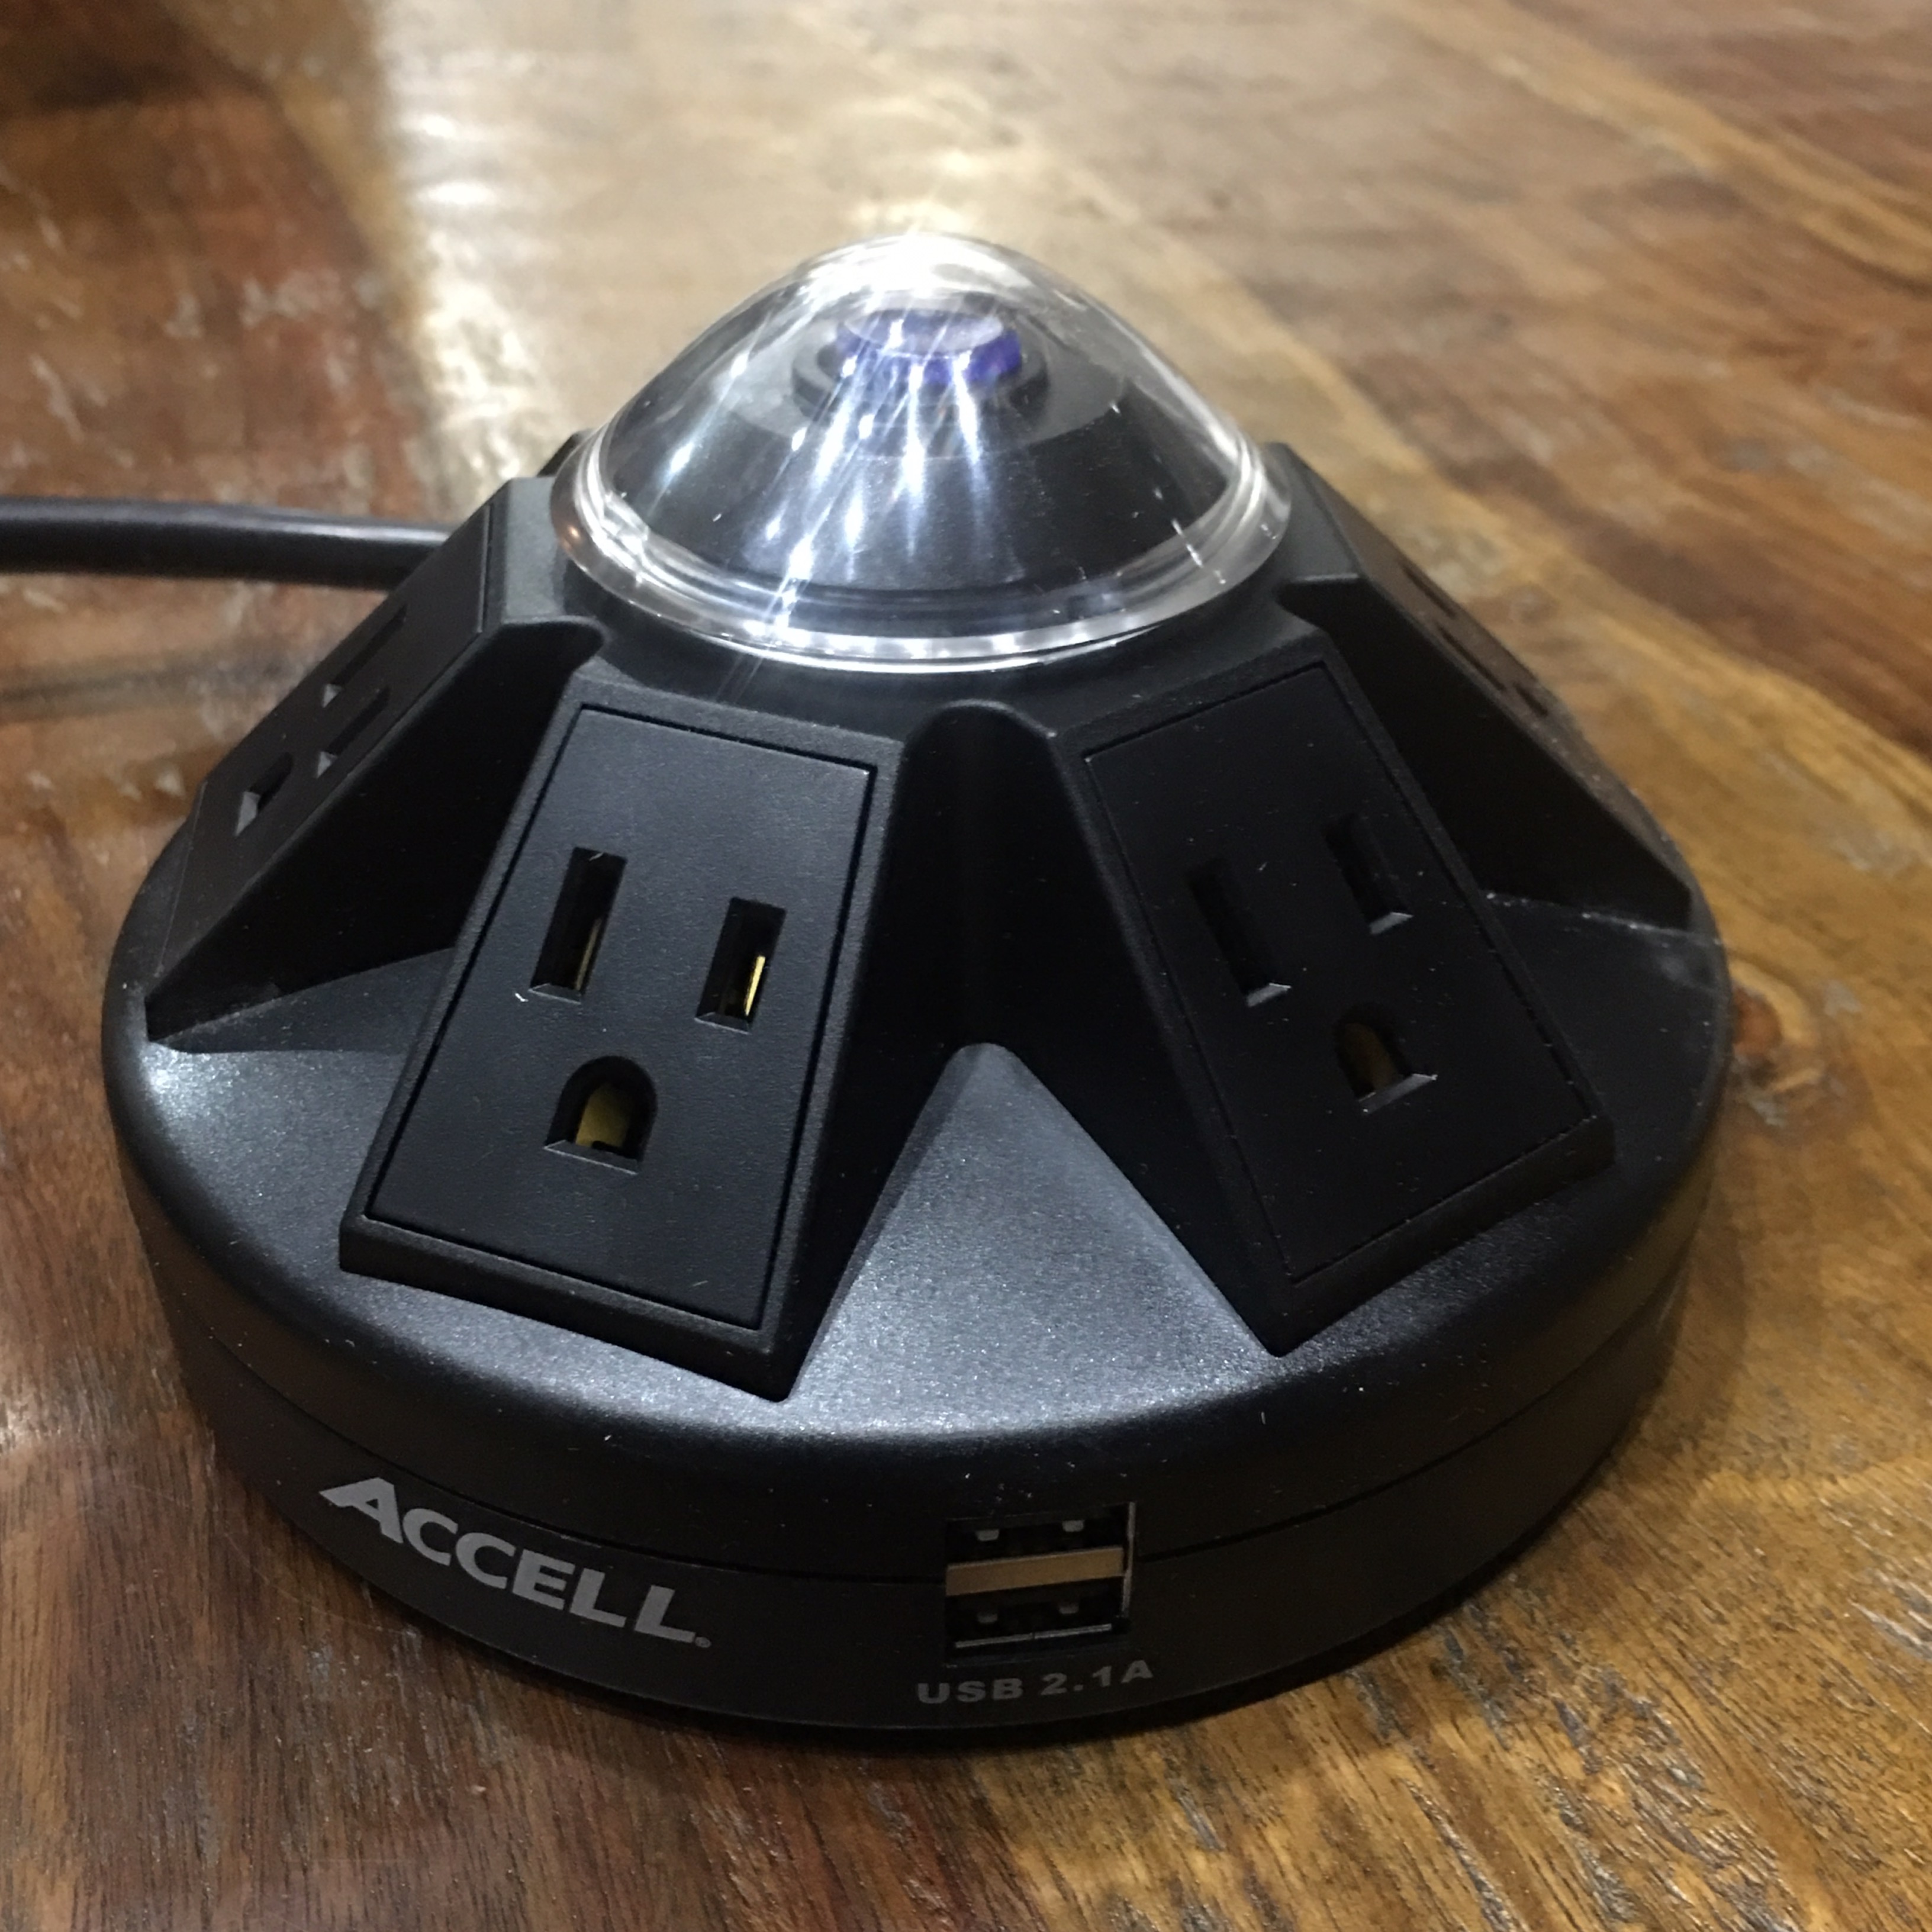 Accell Powramid 6 outlet 2 USB surge protector